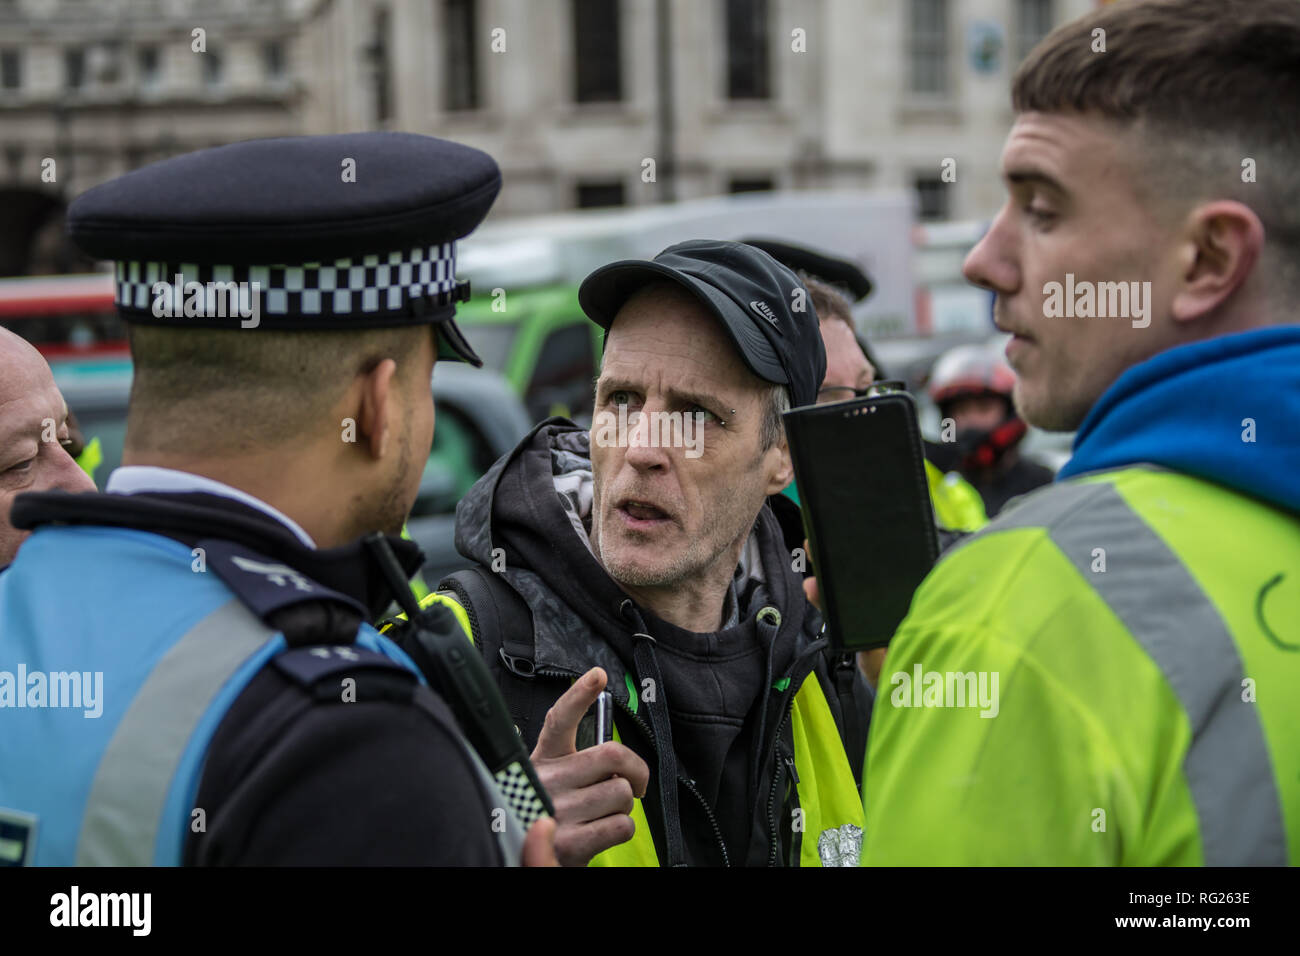 London,UK. 26 January, 2019. Right-wing yellow vest protesters try to block traffic at Trafalgar Square. David Rowe/Alamy Live News. Stock Photo